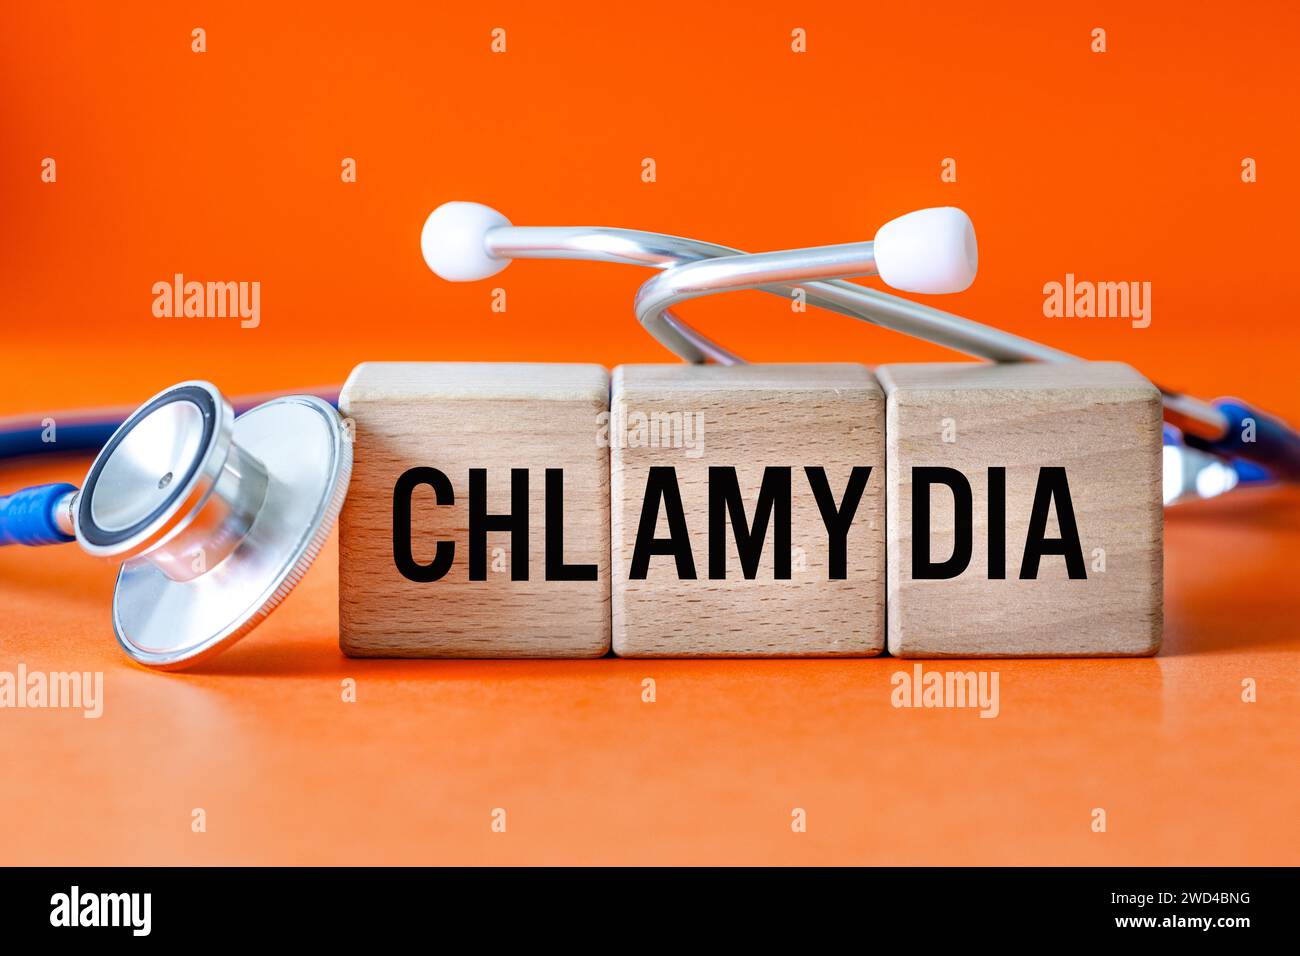 Chlamydia (Chlamydia Trachomatis) Health concept, Bacteria causing urinary tract infection, Sexually transmitted disease, doctor's stethoscope and wor Stock Photo